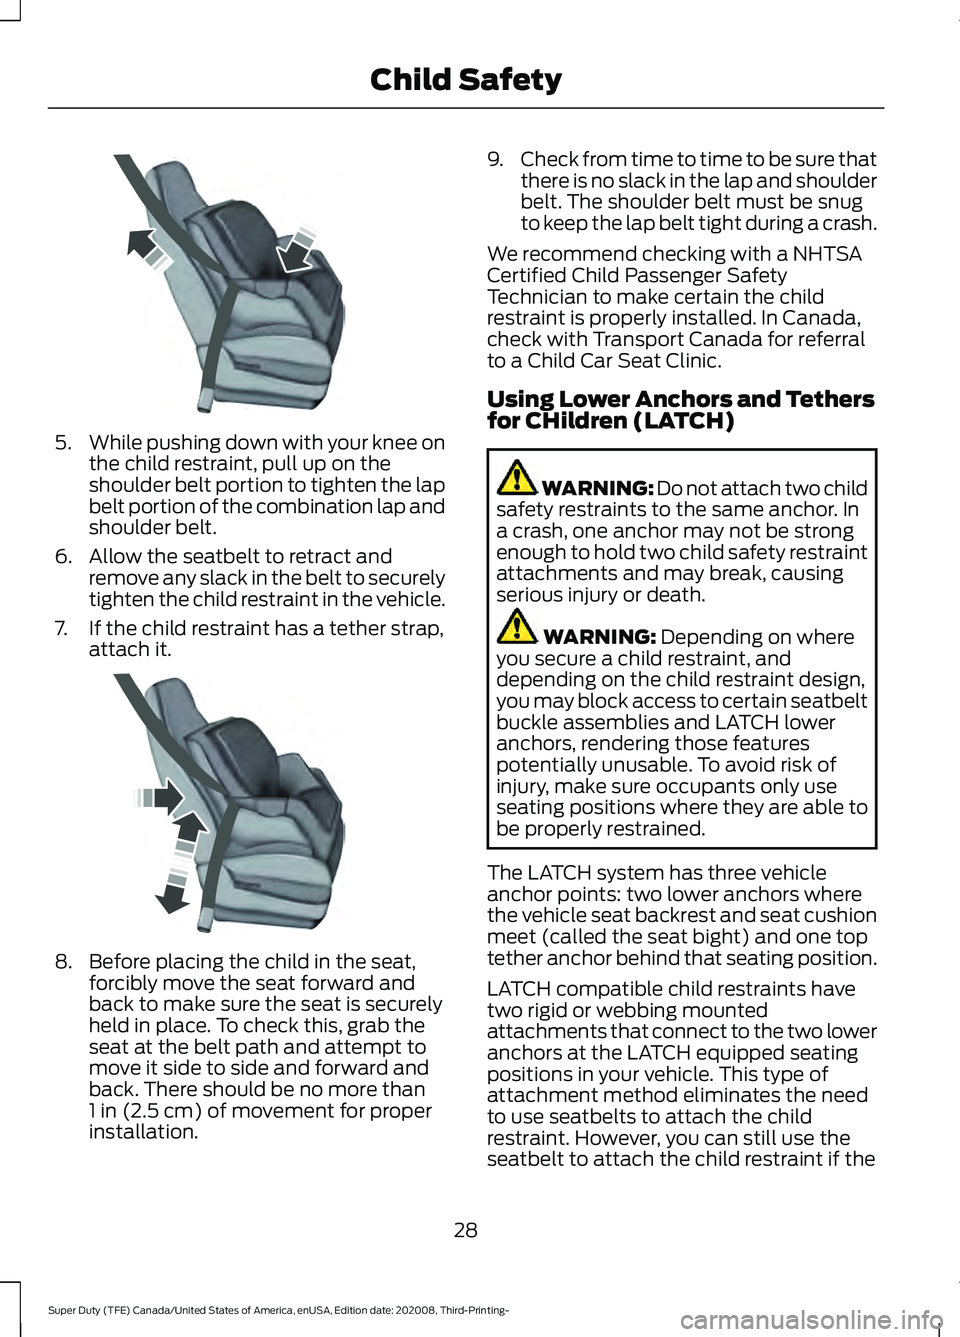 FORD F-600 2021  Owners Manual 5.
While pushing down with your knee on
the child restraint, pull up on the
shoulder belt portion to tighten the lap
belt portion of the combination lap and
shoulder belt.
6. Allow the seatbelt to ret